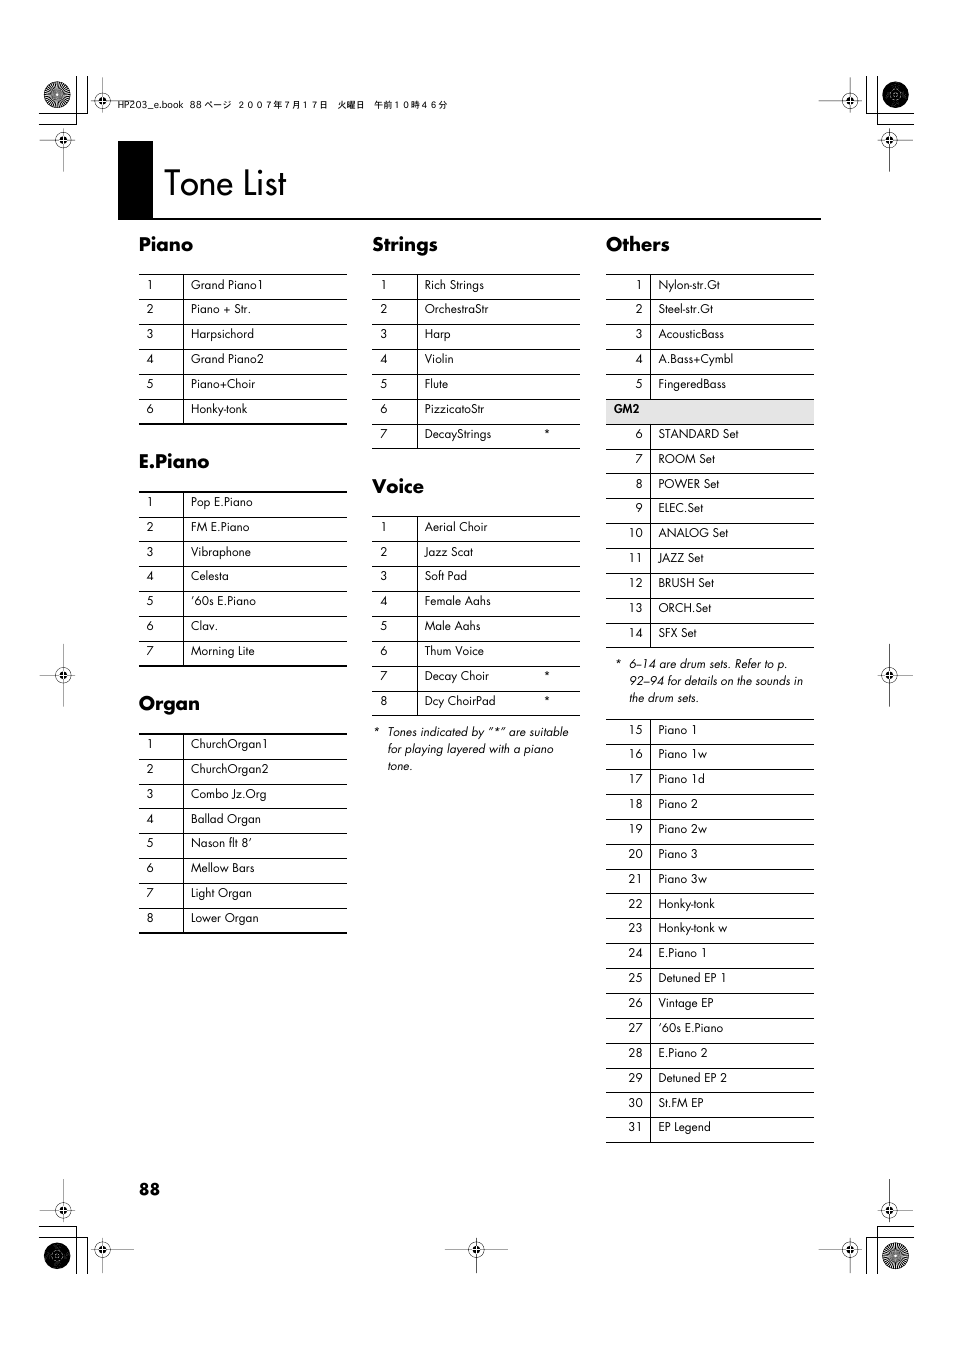 Tone list, Piano e.piano organ strings voice, Others | Roland HP203 User  Manual | Page 90 / 108 | Original mode